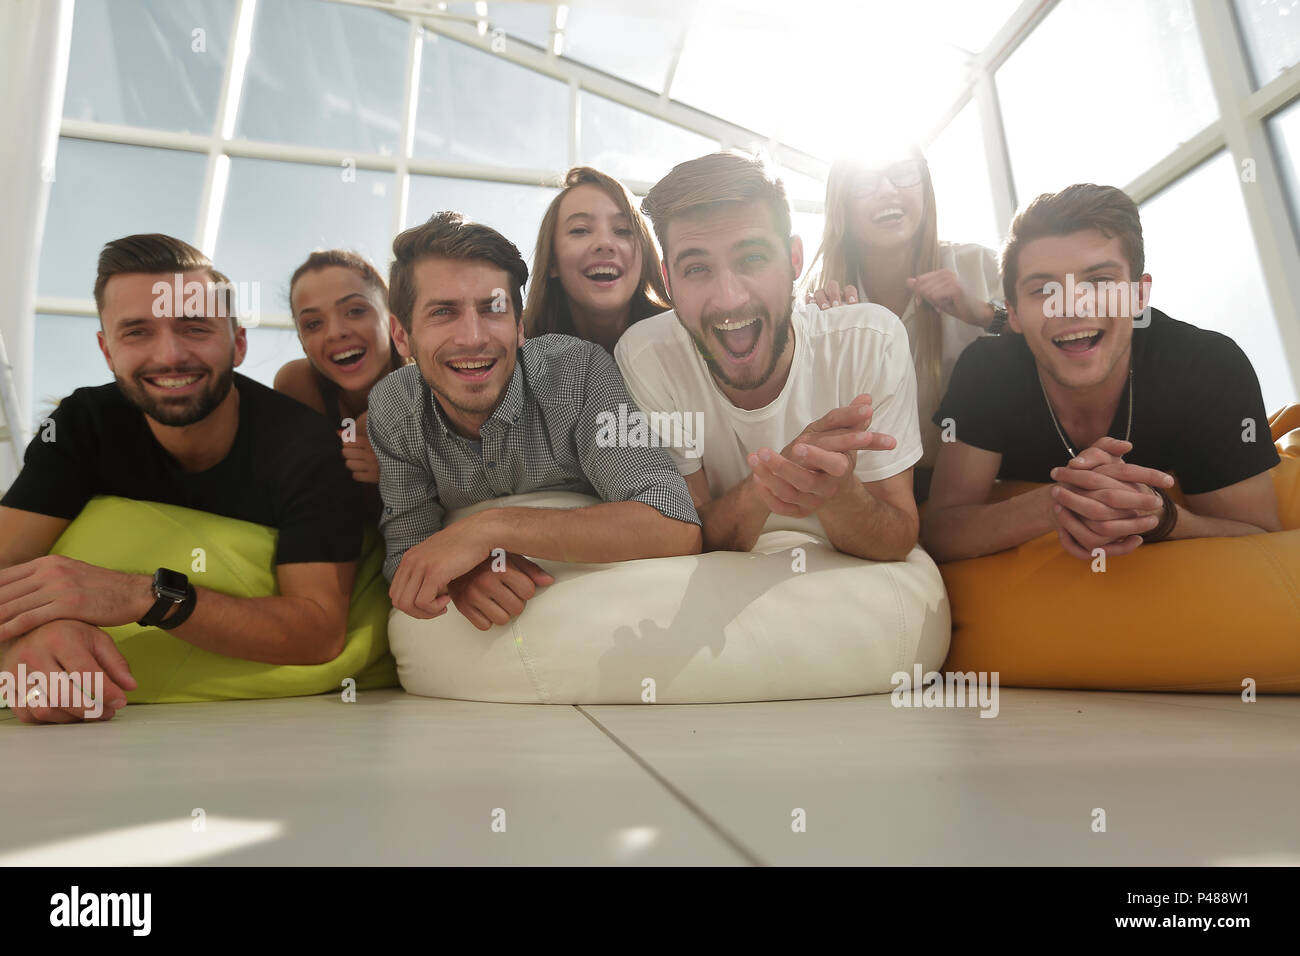 Group Of Young People Lying On The Floor And Smiling Stock Photo